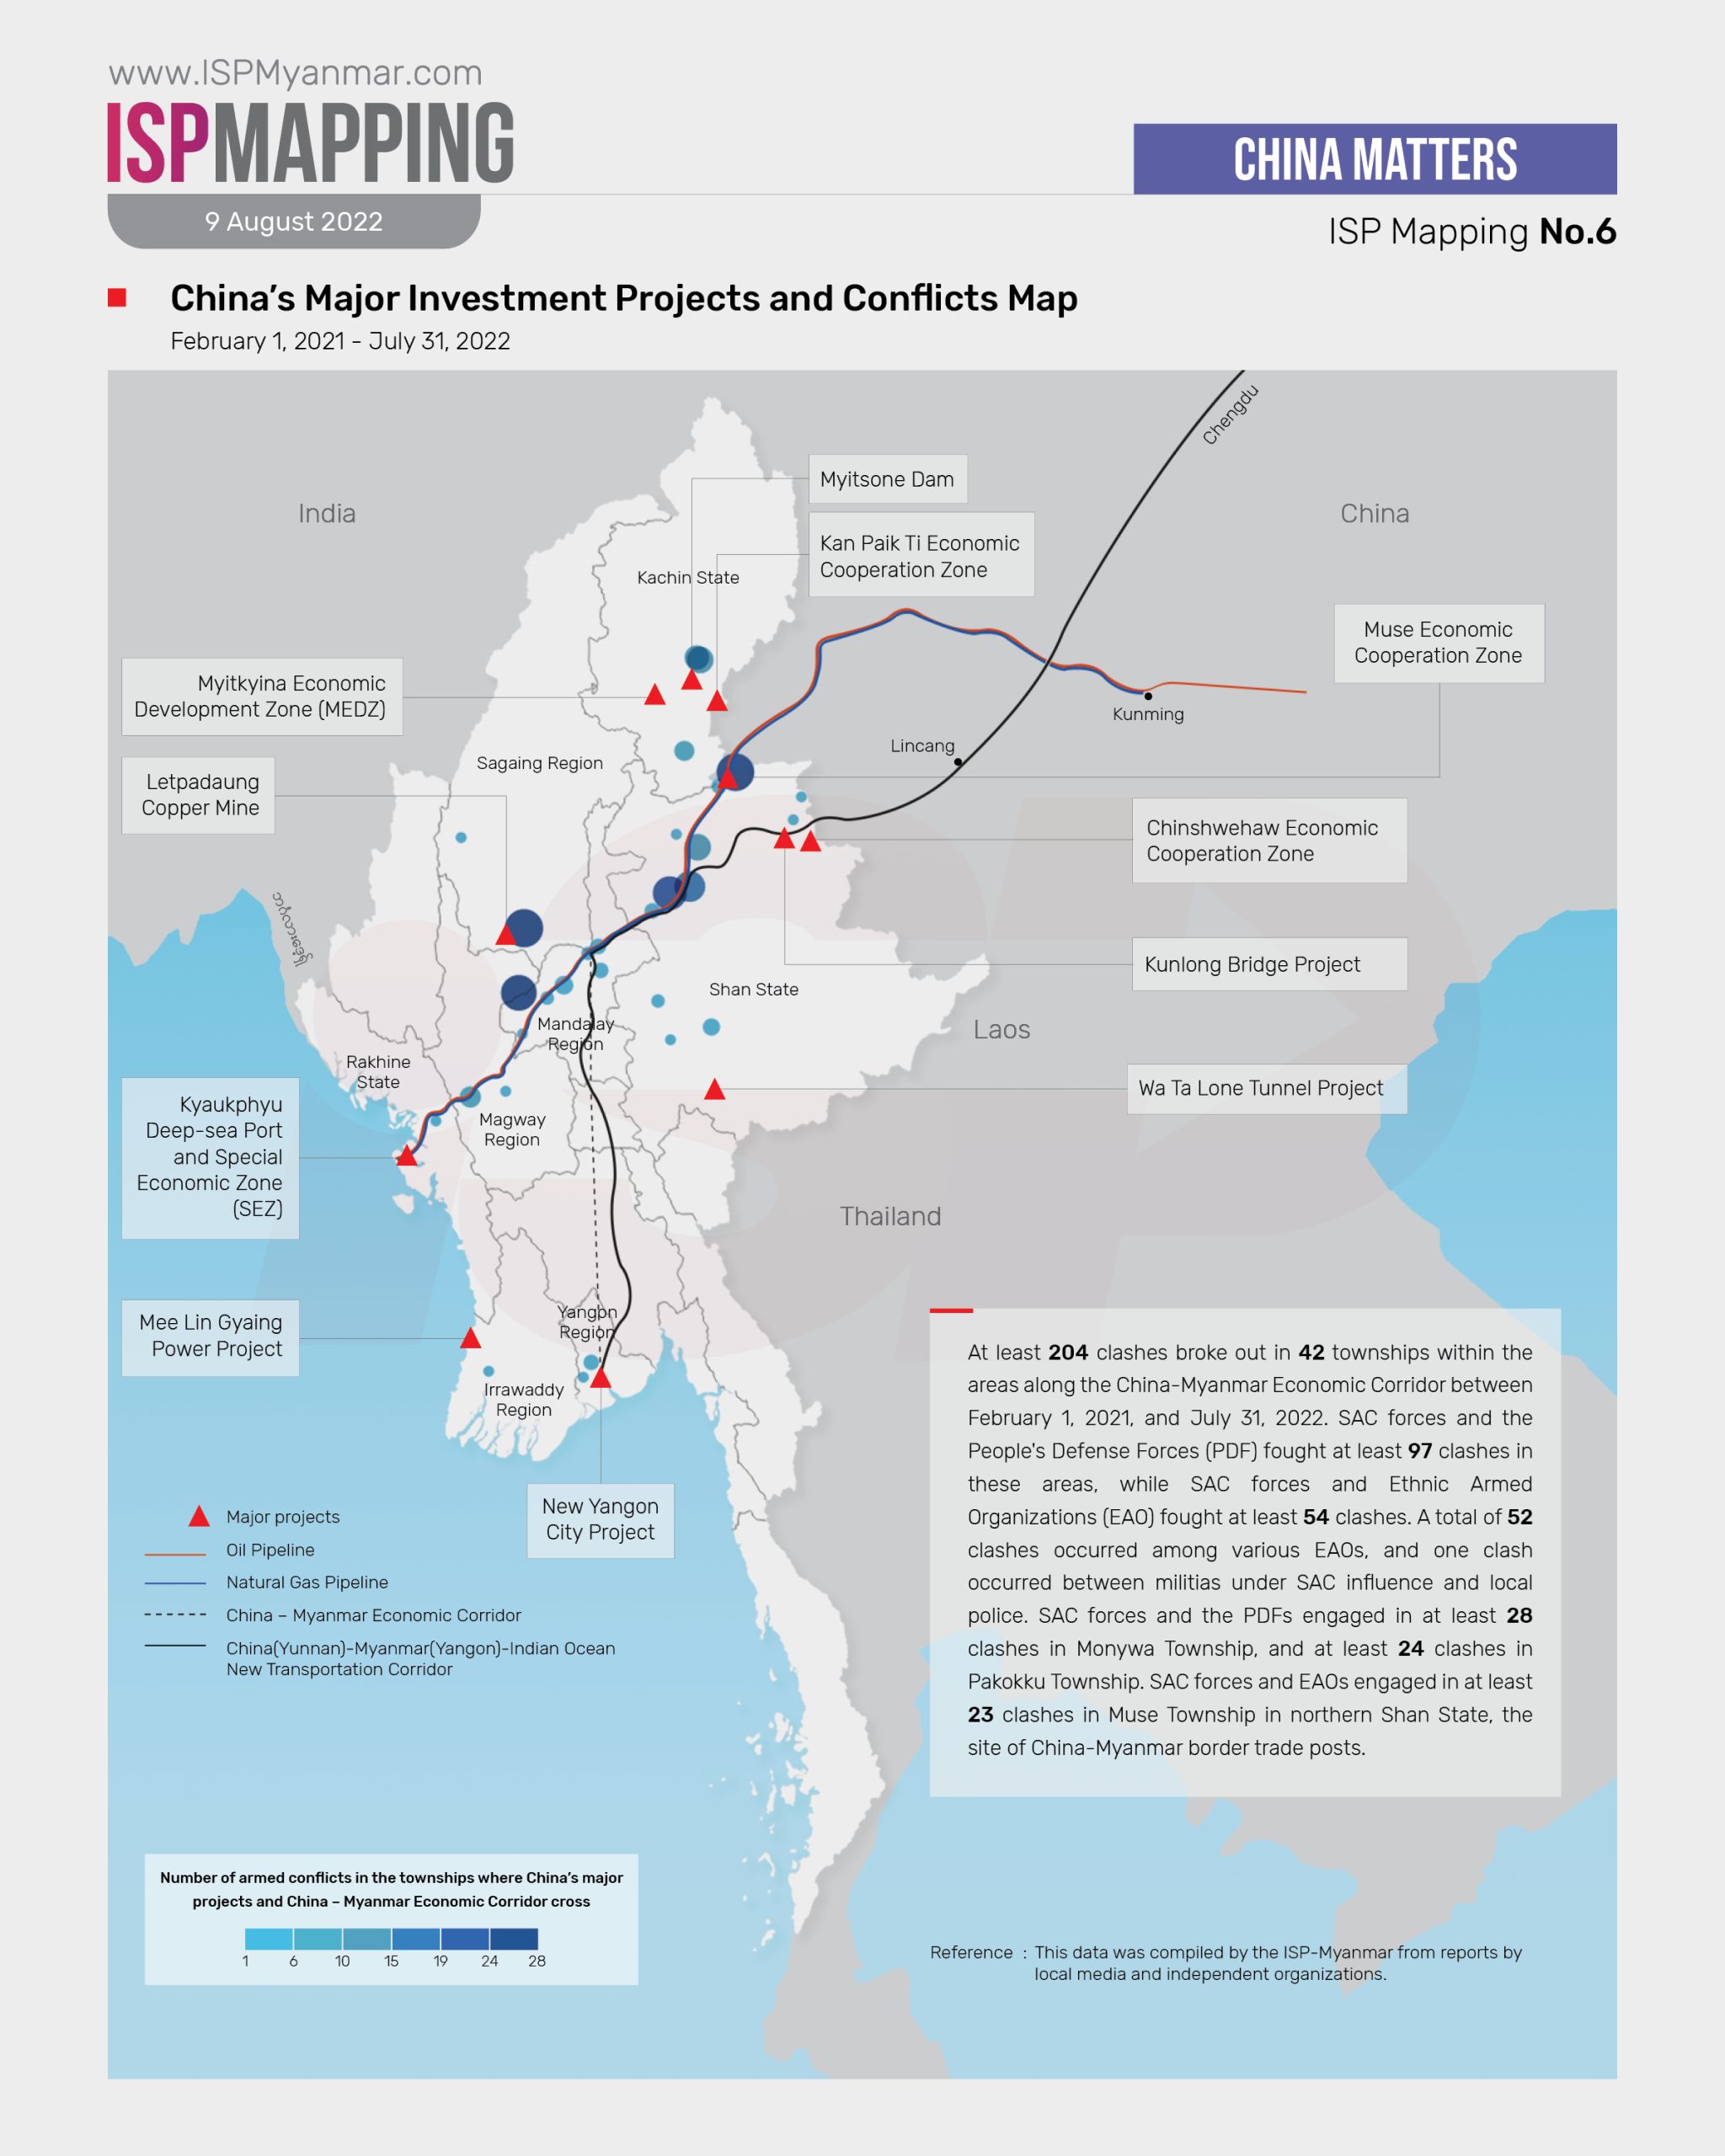 China's Major Investment Projects and Conflicts Map